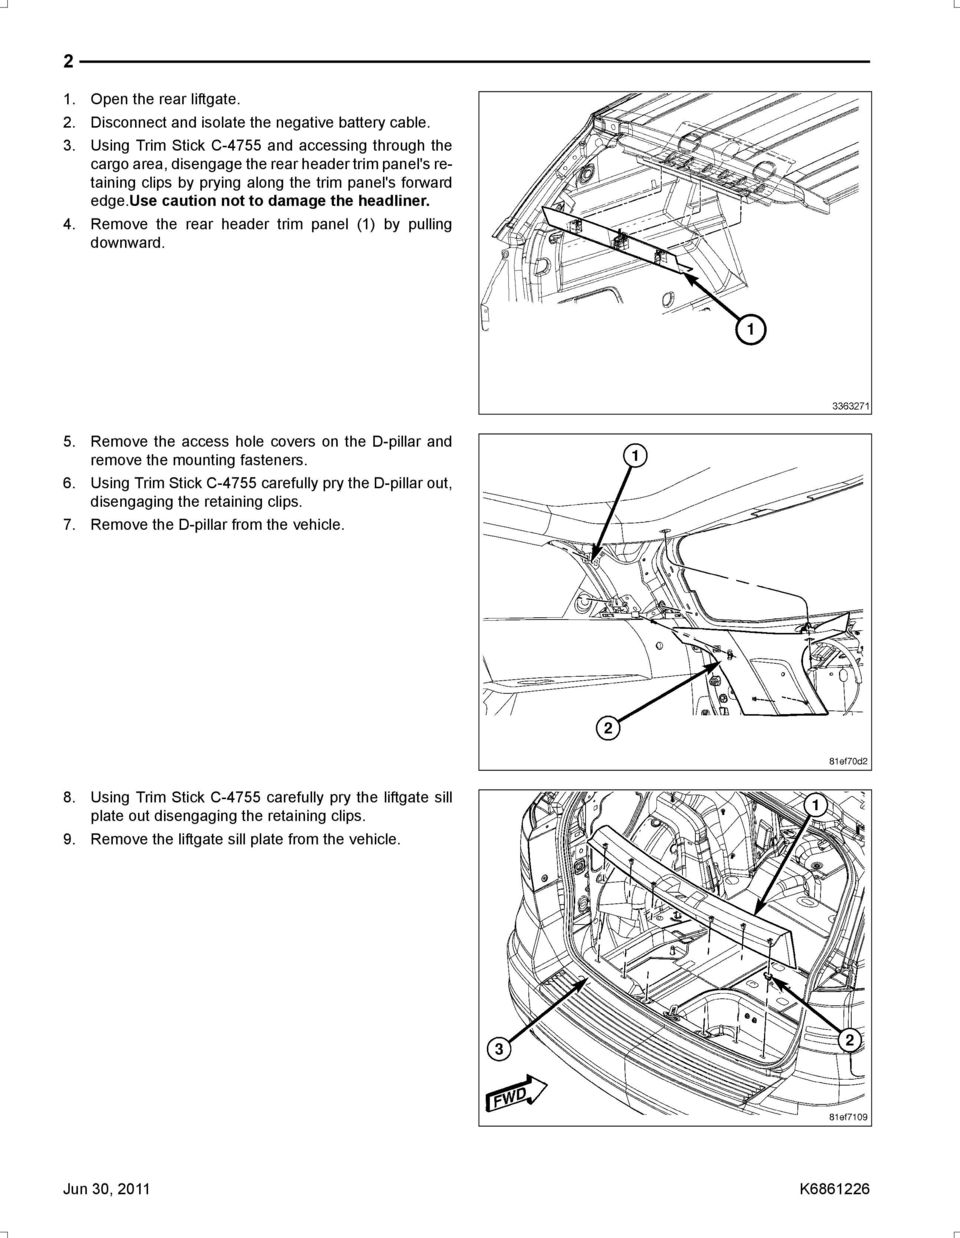 use caution not to damage the headliner. 4. Remove the rear header trim panel (1) by pulling downward. 5.